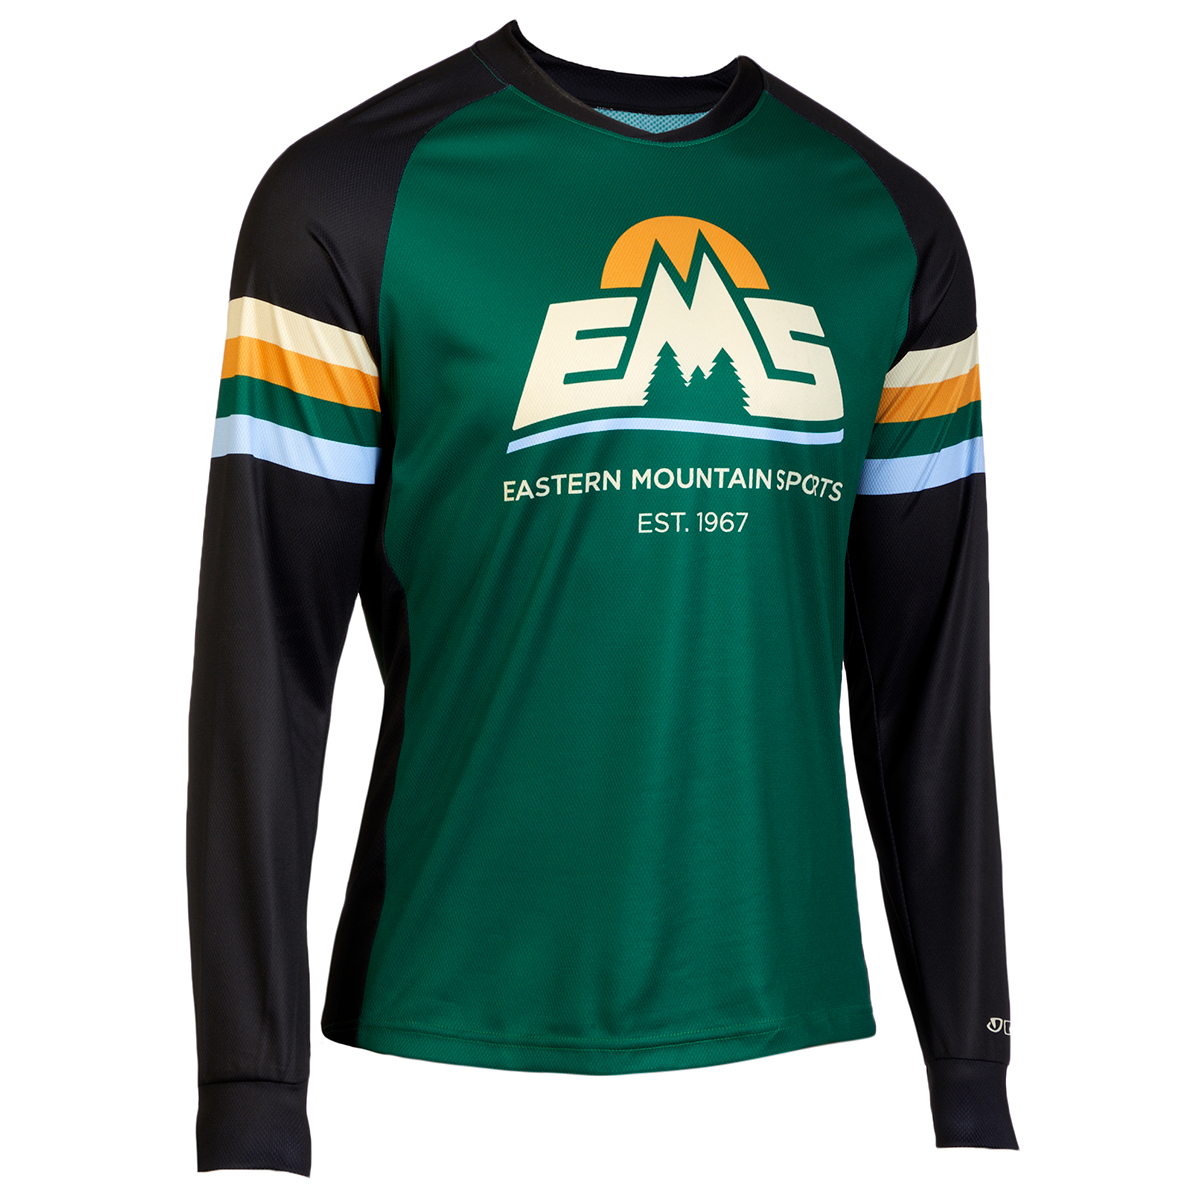 Ems Men's Roust Long-Sleeve Cycling Jersey, Green